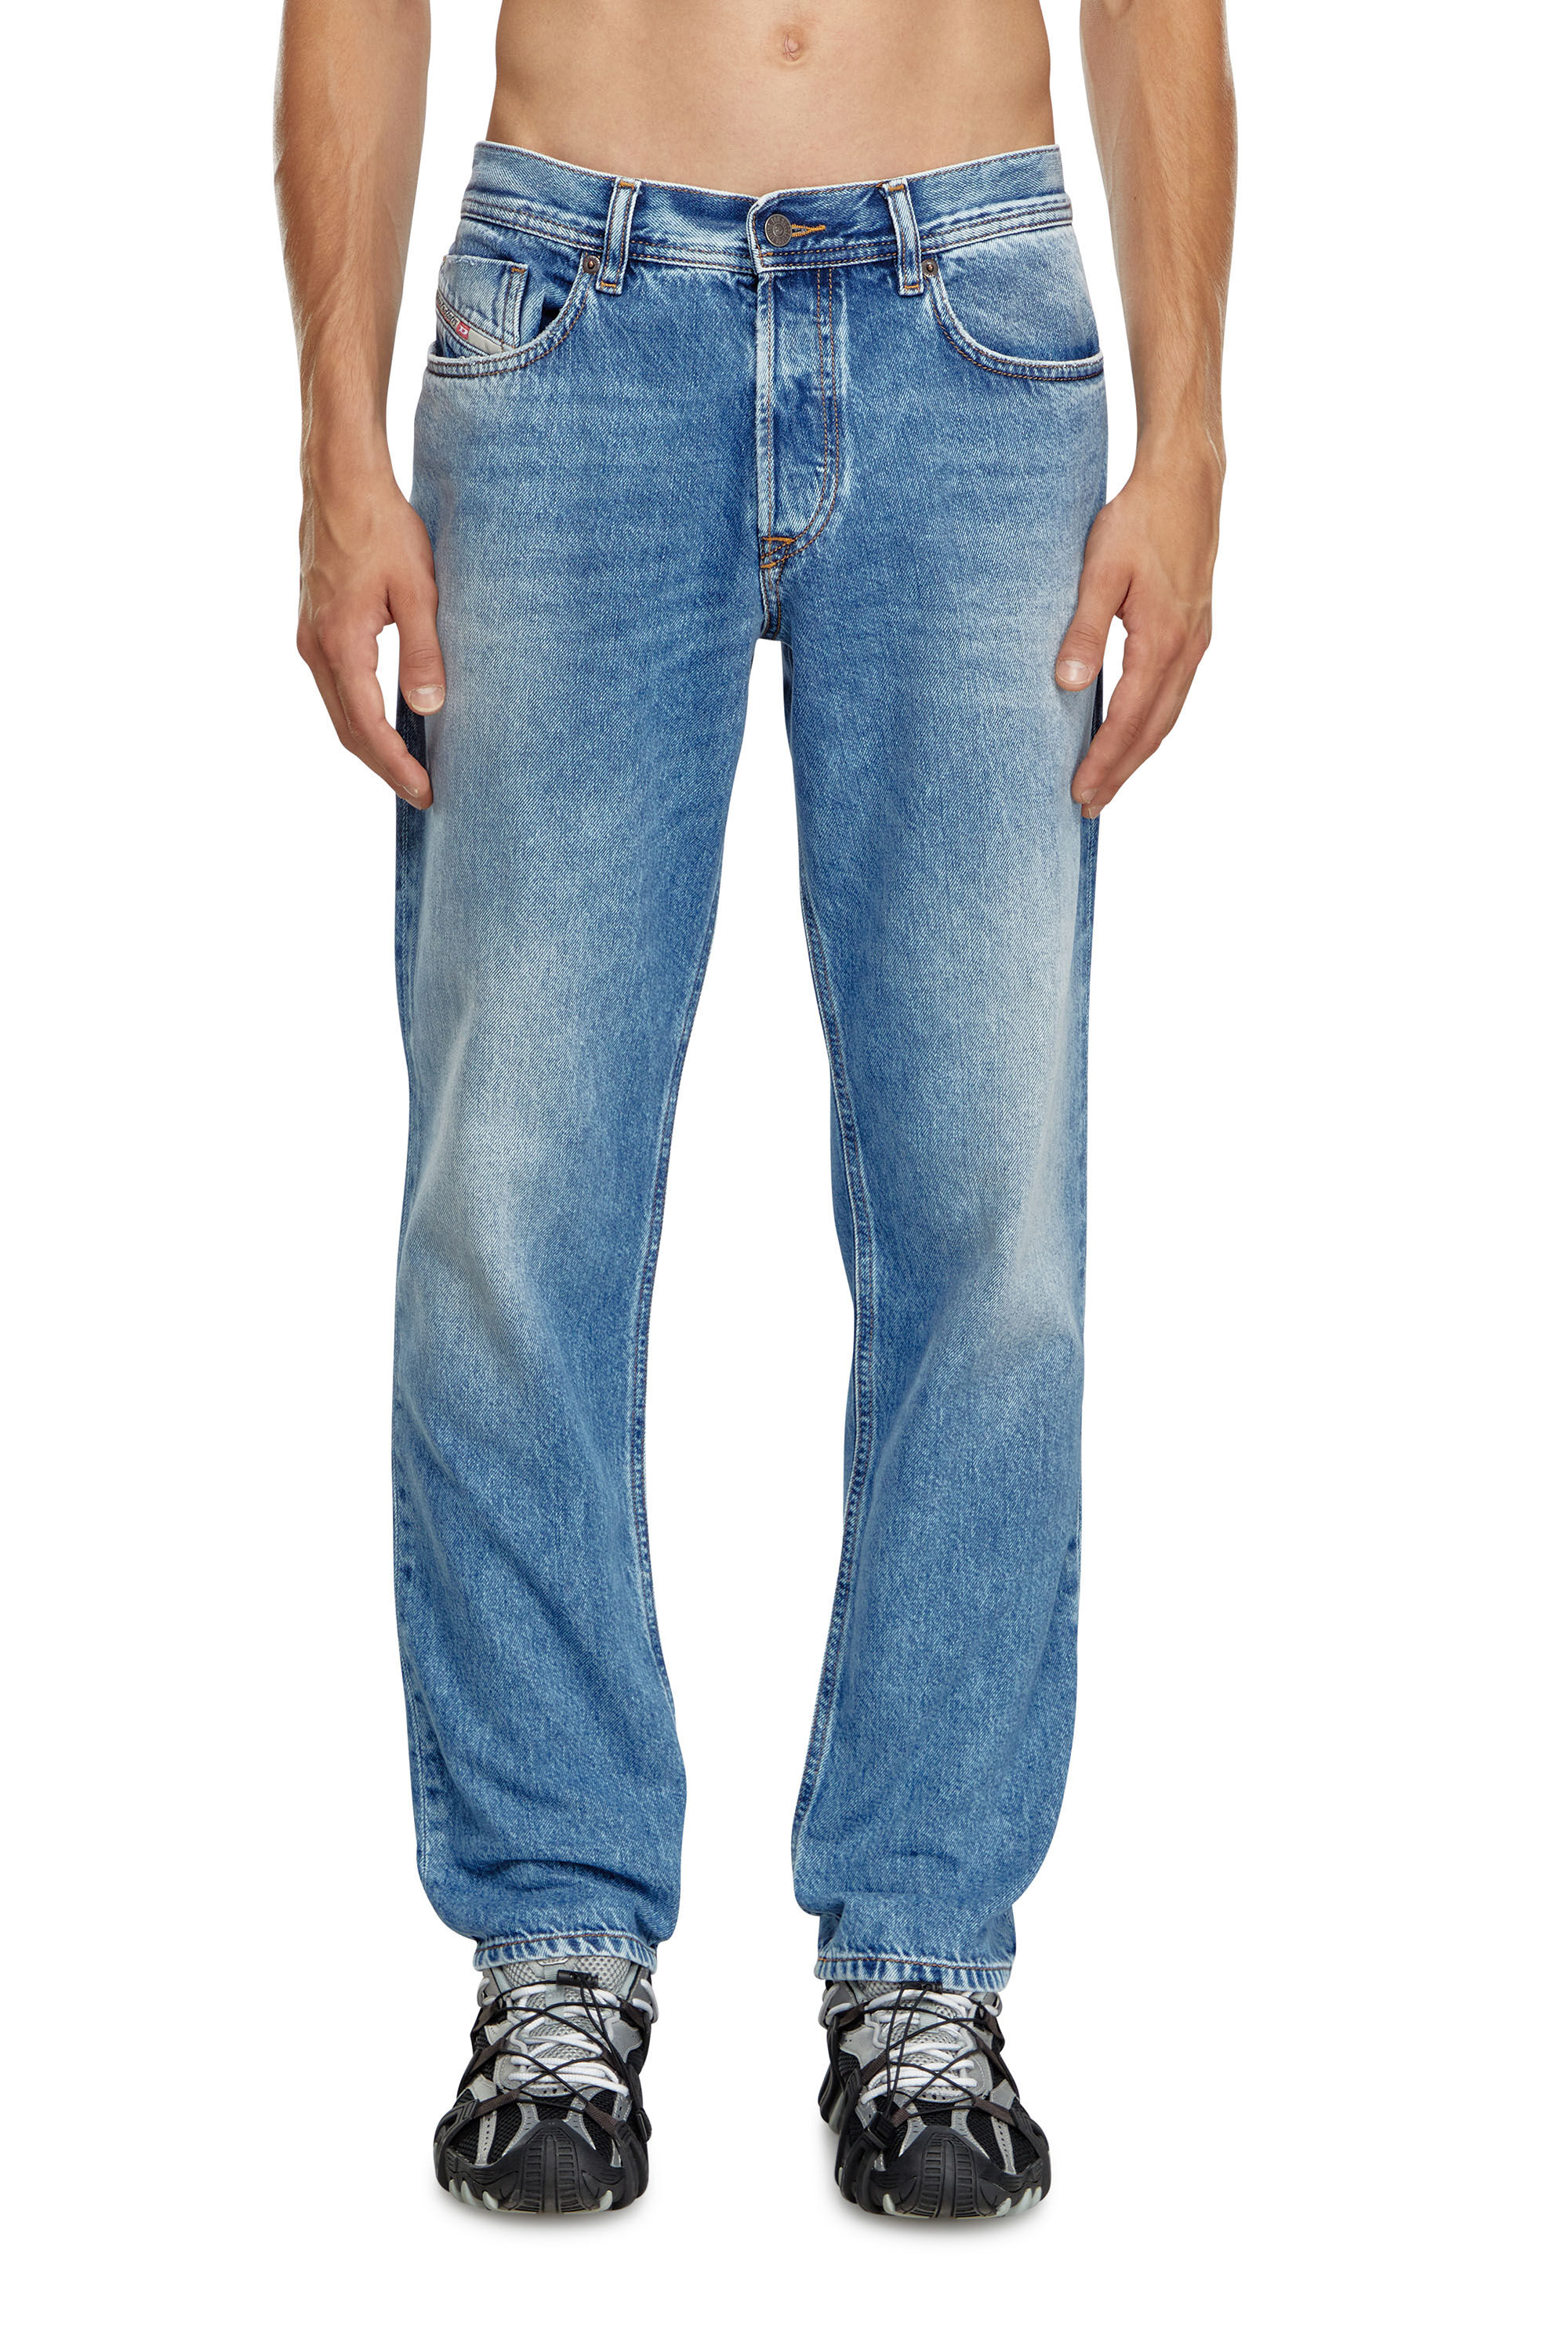 Diesel - Tapered Jeans 2023 D-Finitive 09H95, Hombre Tapered Jeans - 2023 D-Finitive in Azul marino - Image 3